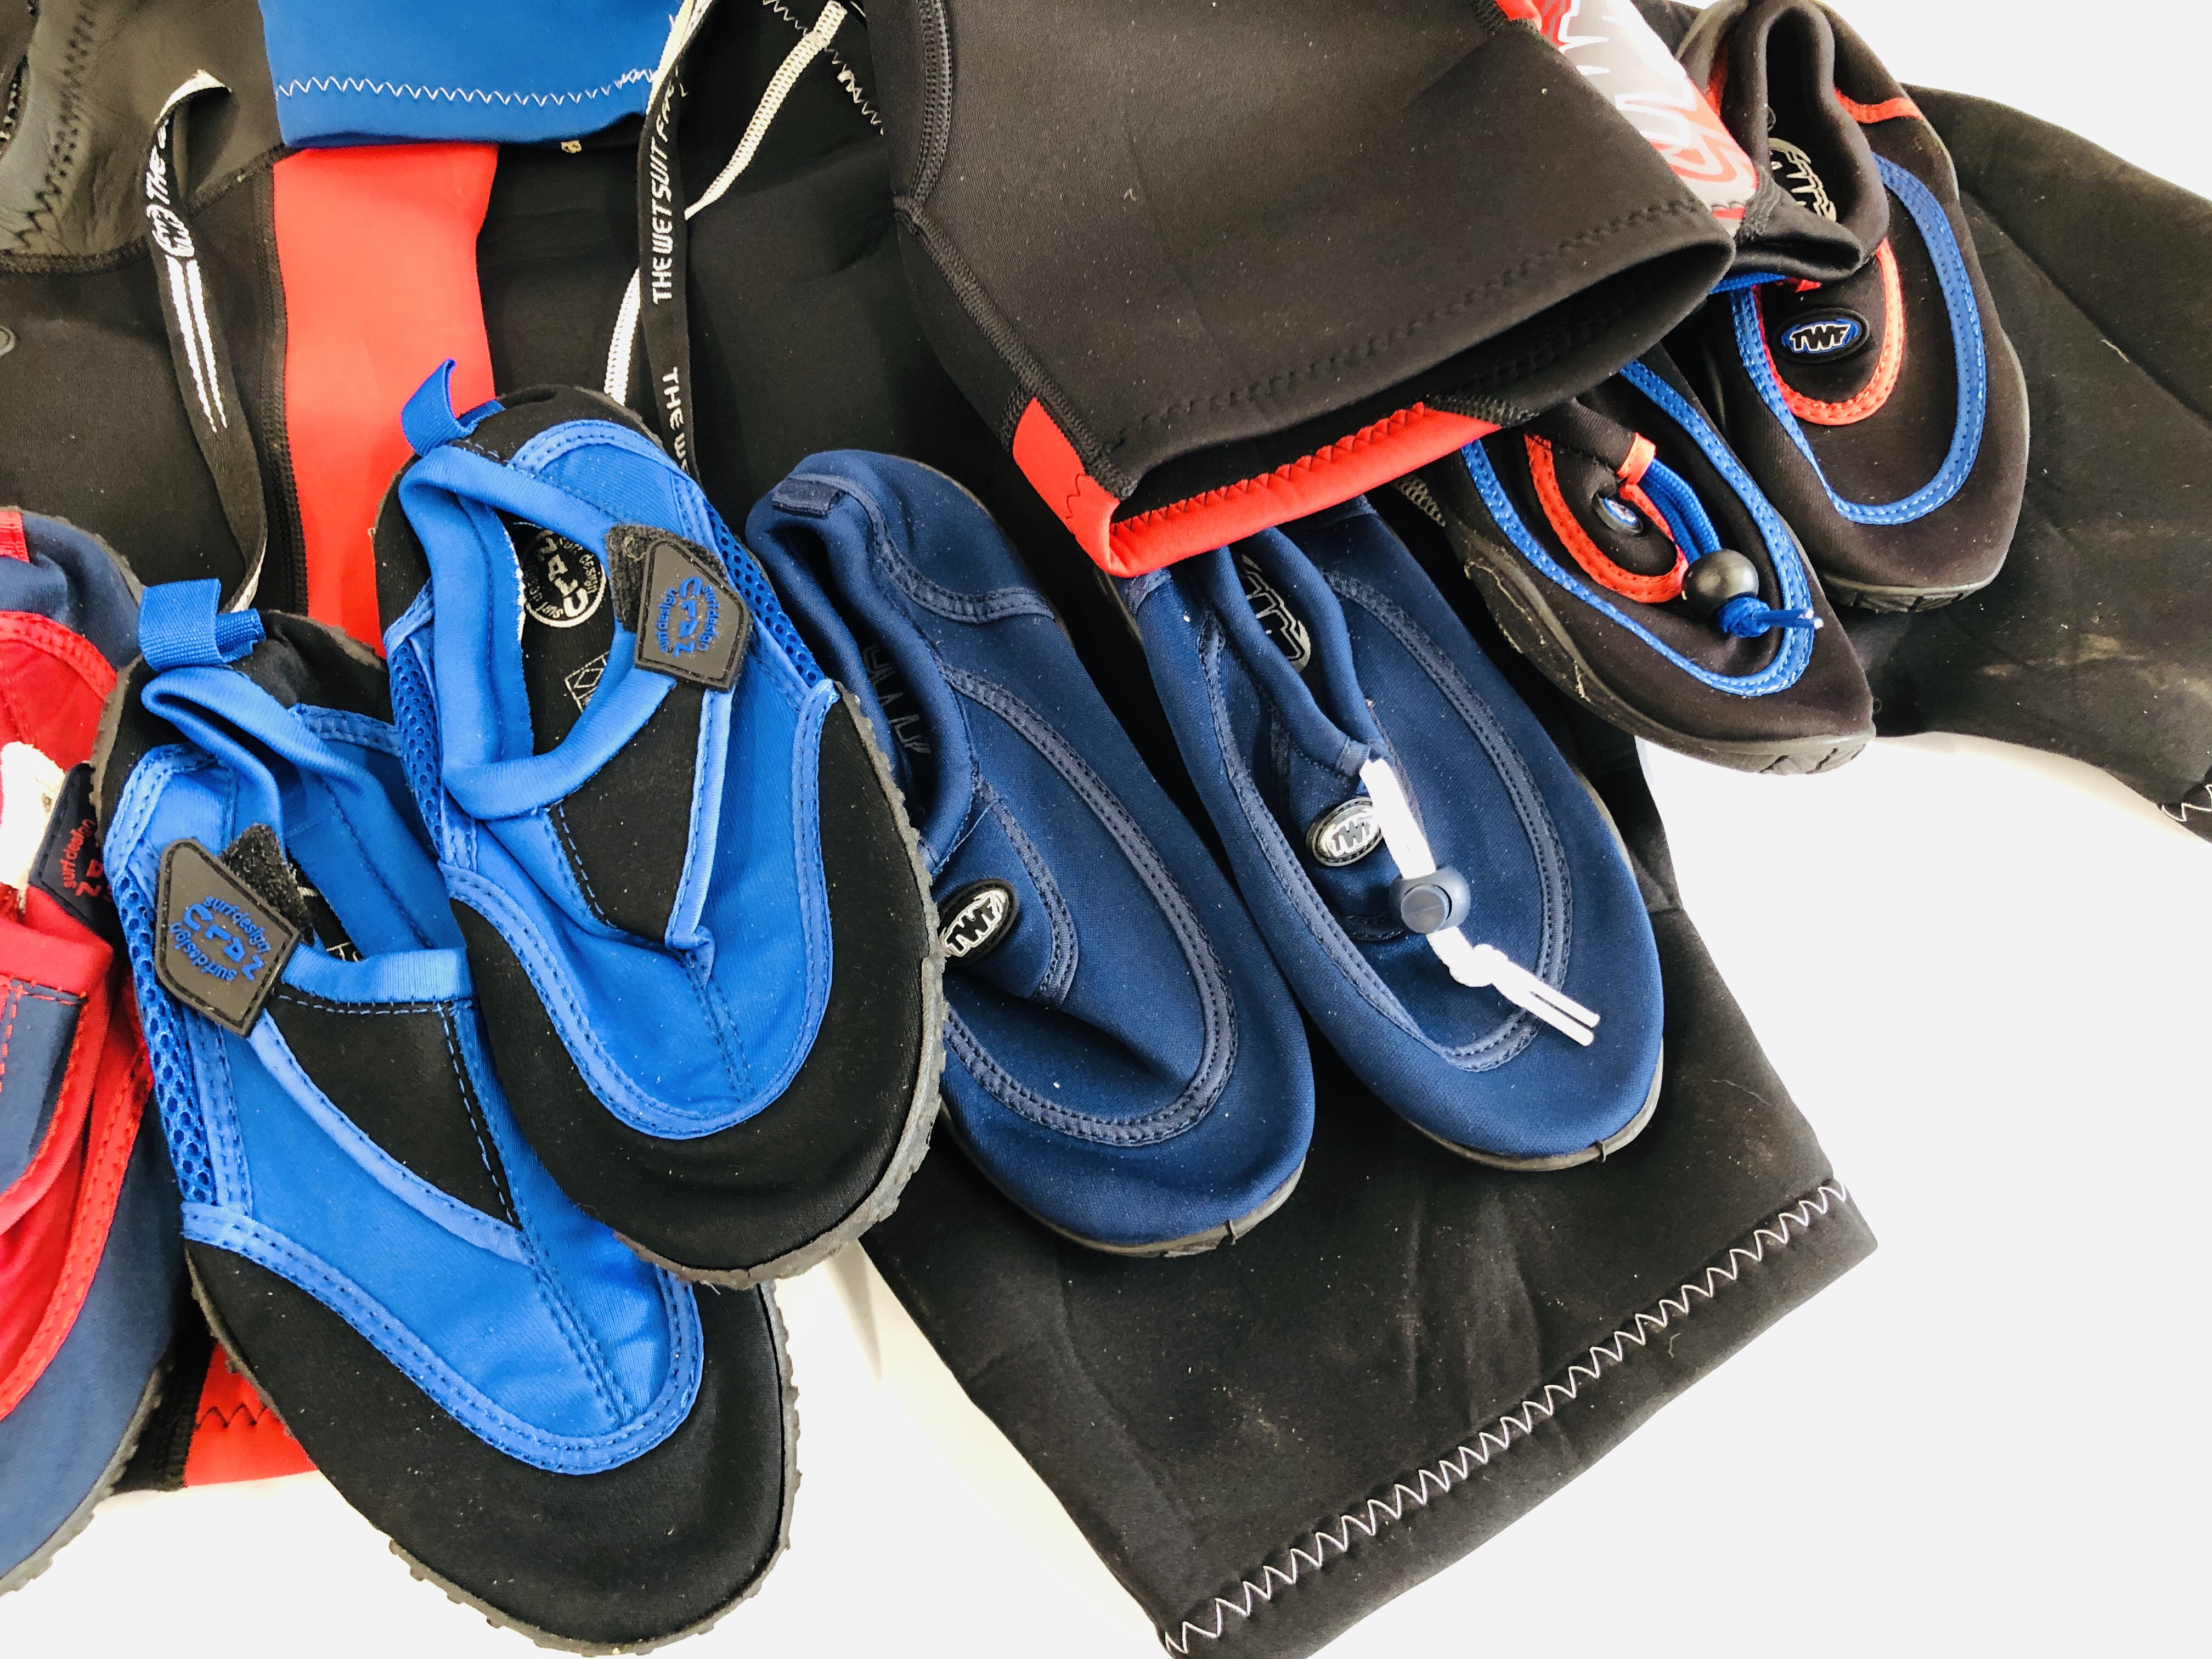 A GROUP OF 7 KIDS WET SUITS INCLUDING SIZES 11, 12 AND 8 + VARIOUS WATER SHOES. - Image 3 of 12